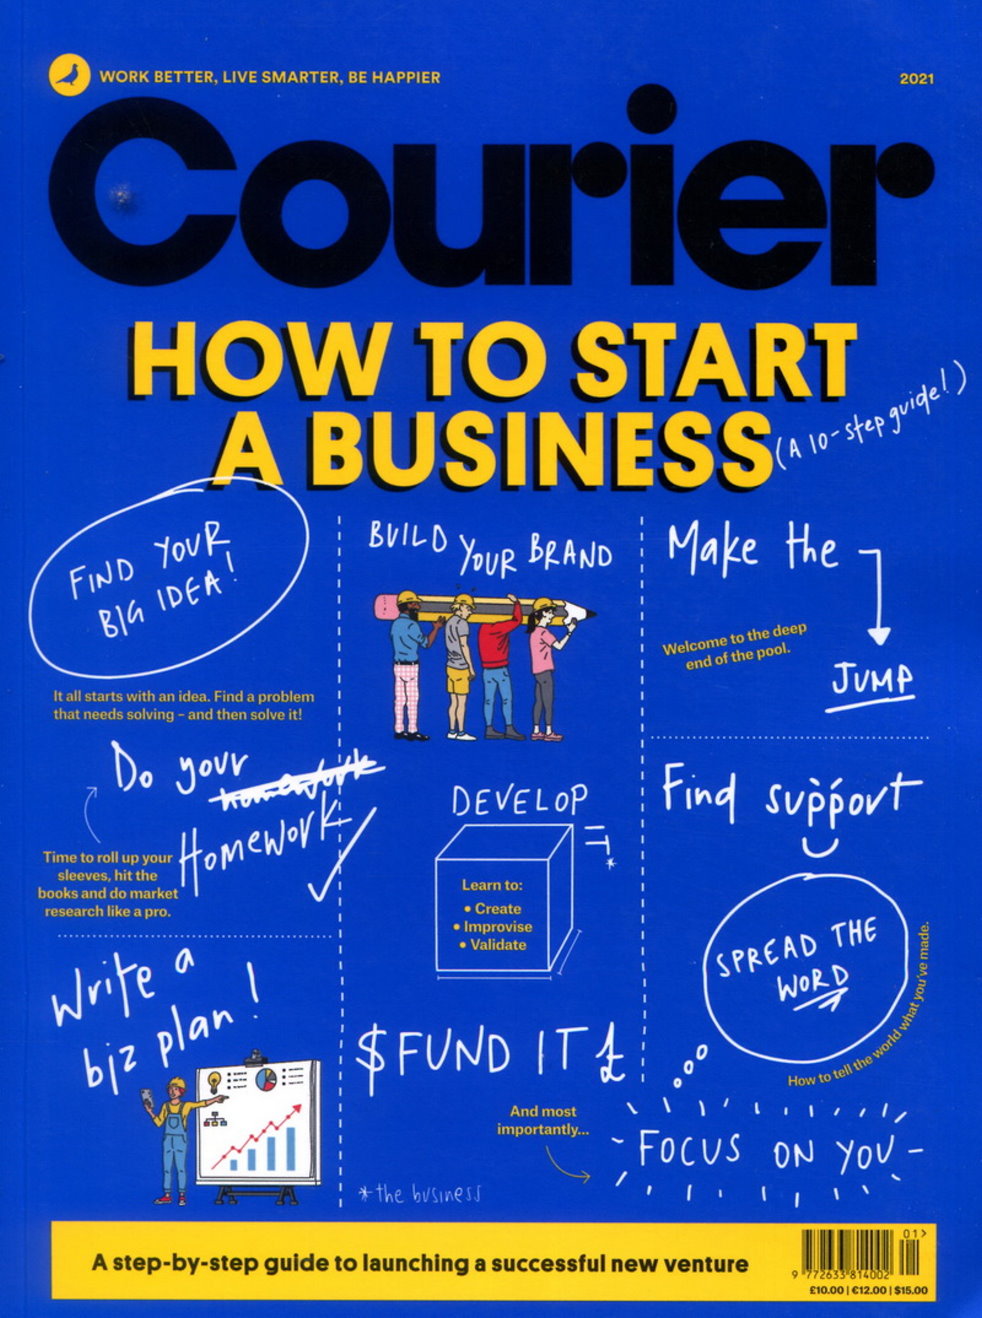 Courier Mag Book HOW TO START A BUSINESS 2021